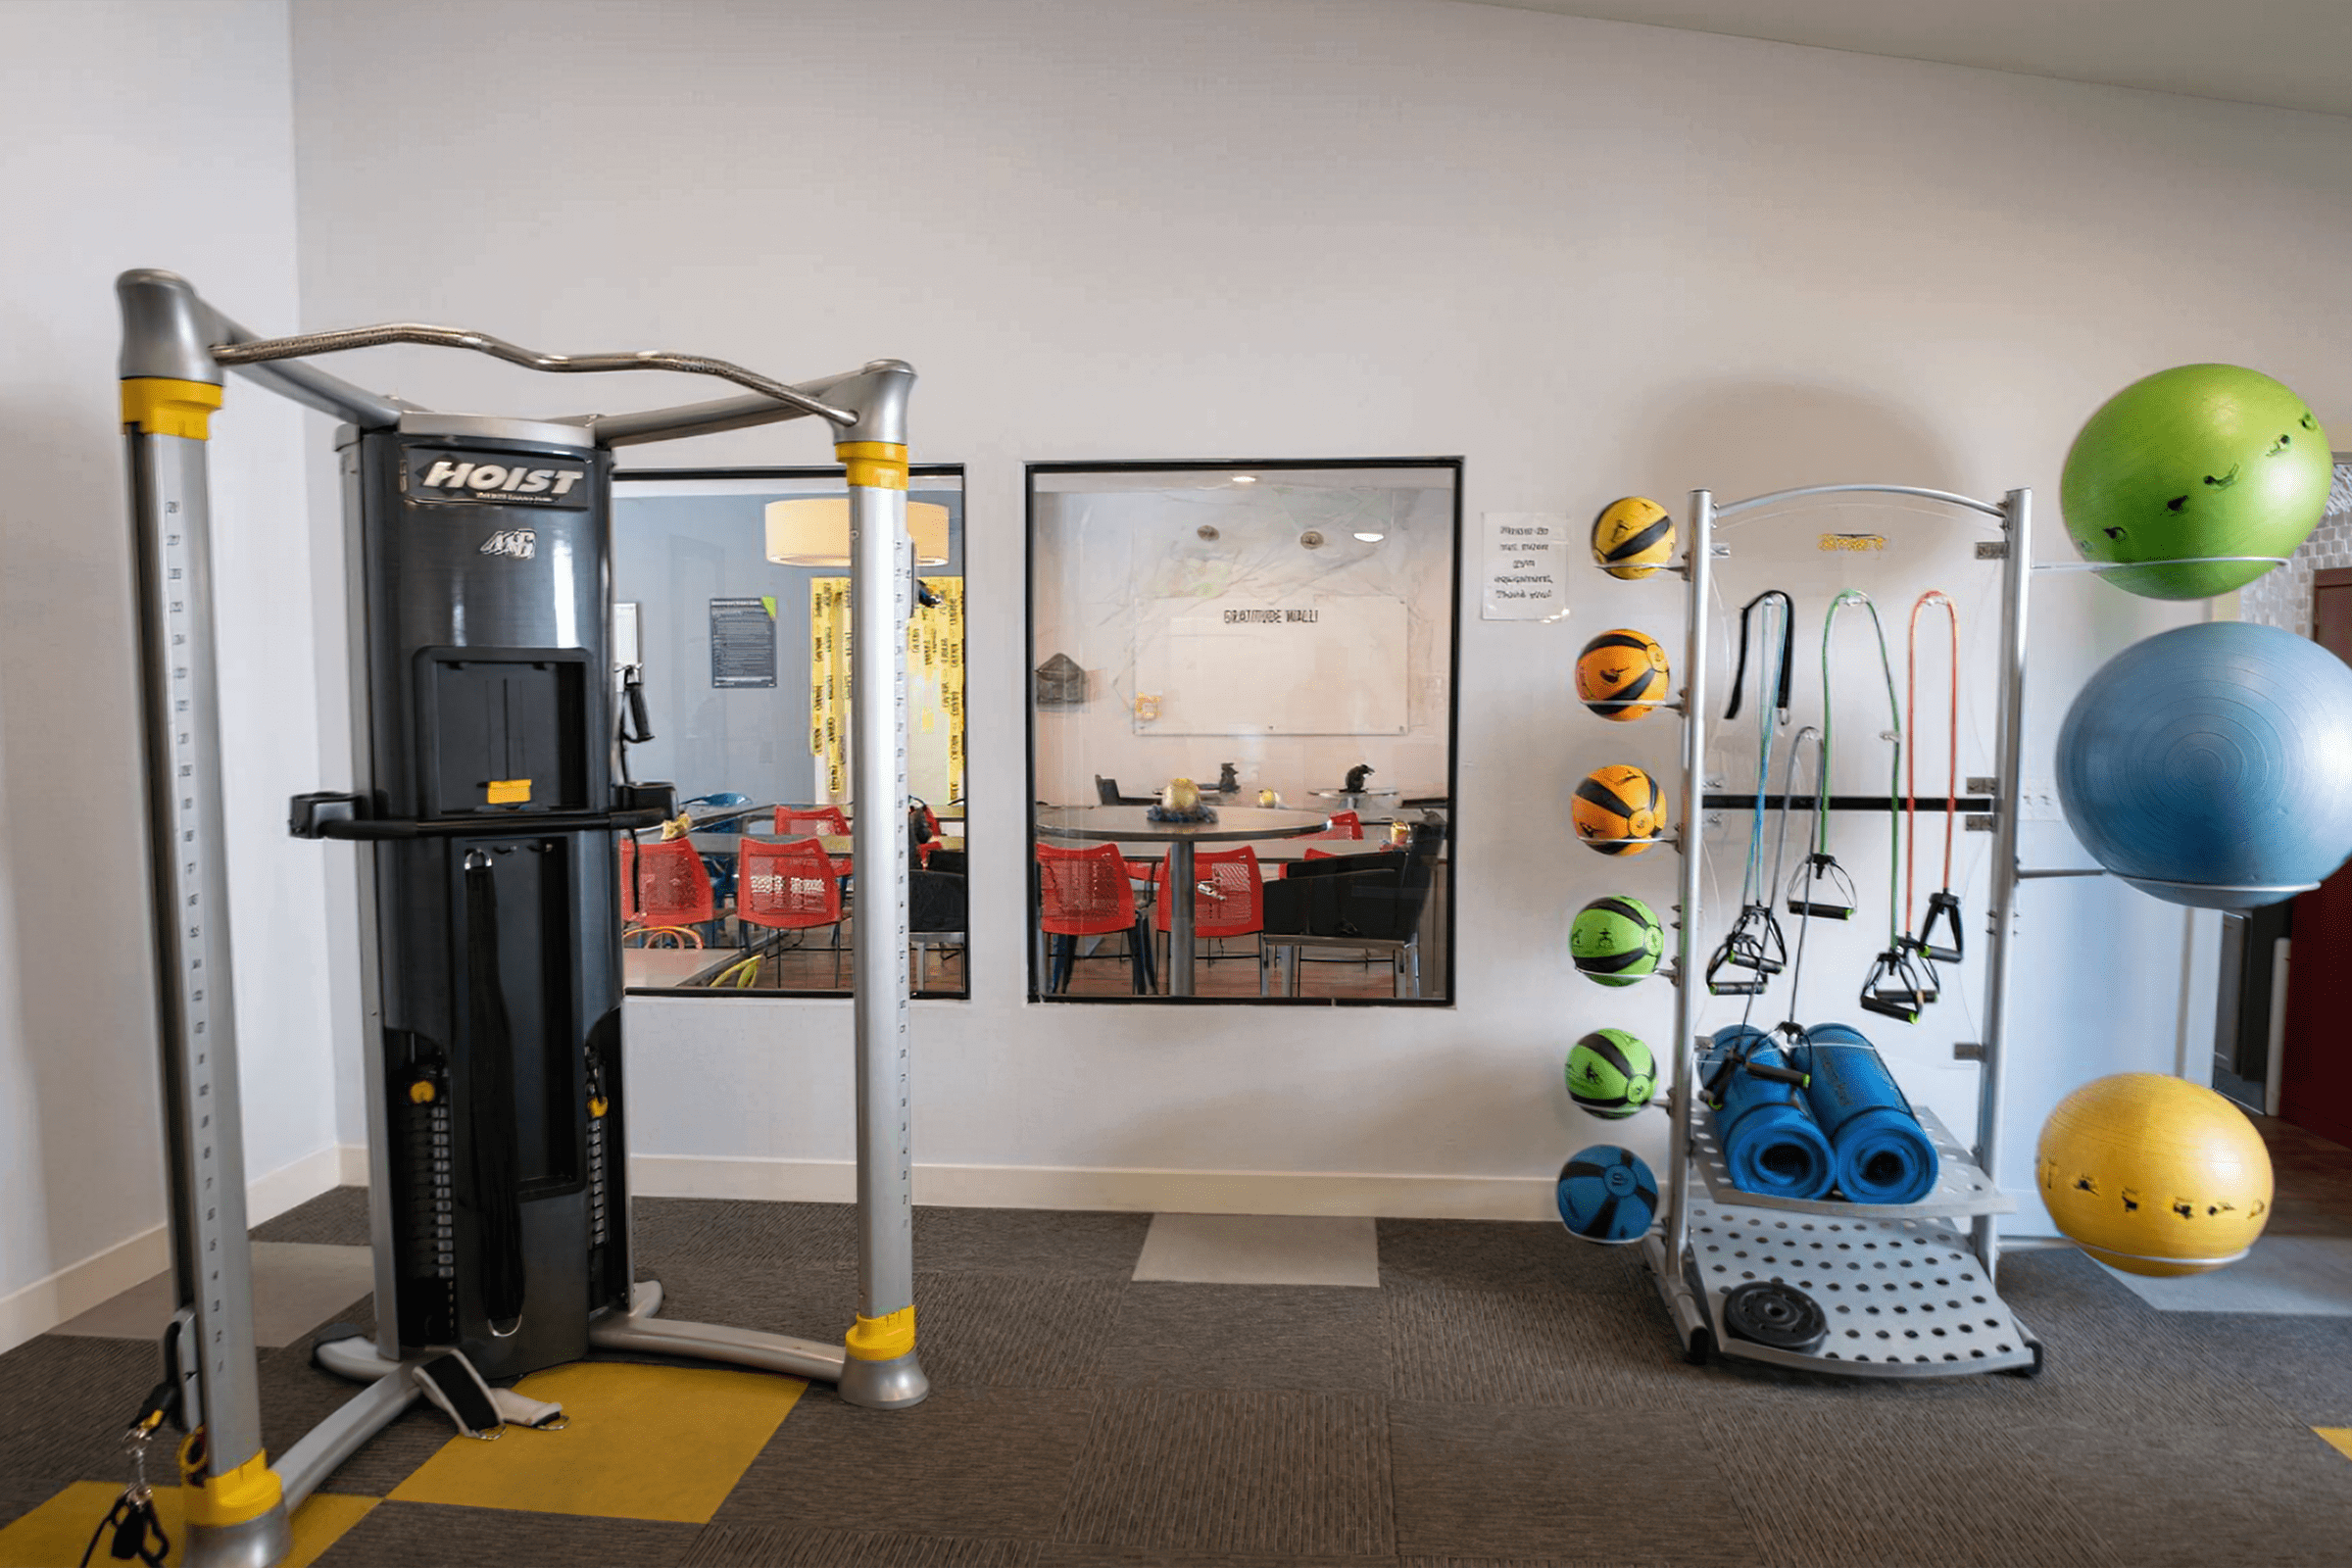 WORK OUT IN THE STATE-OF-THE-ARE FITNESS CENTER